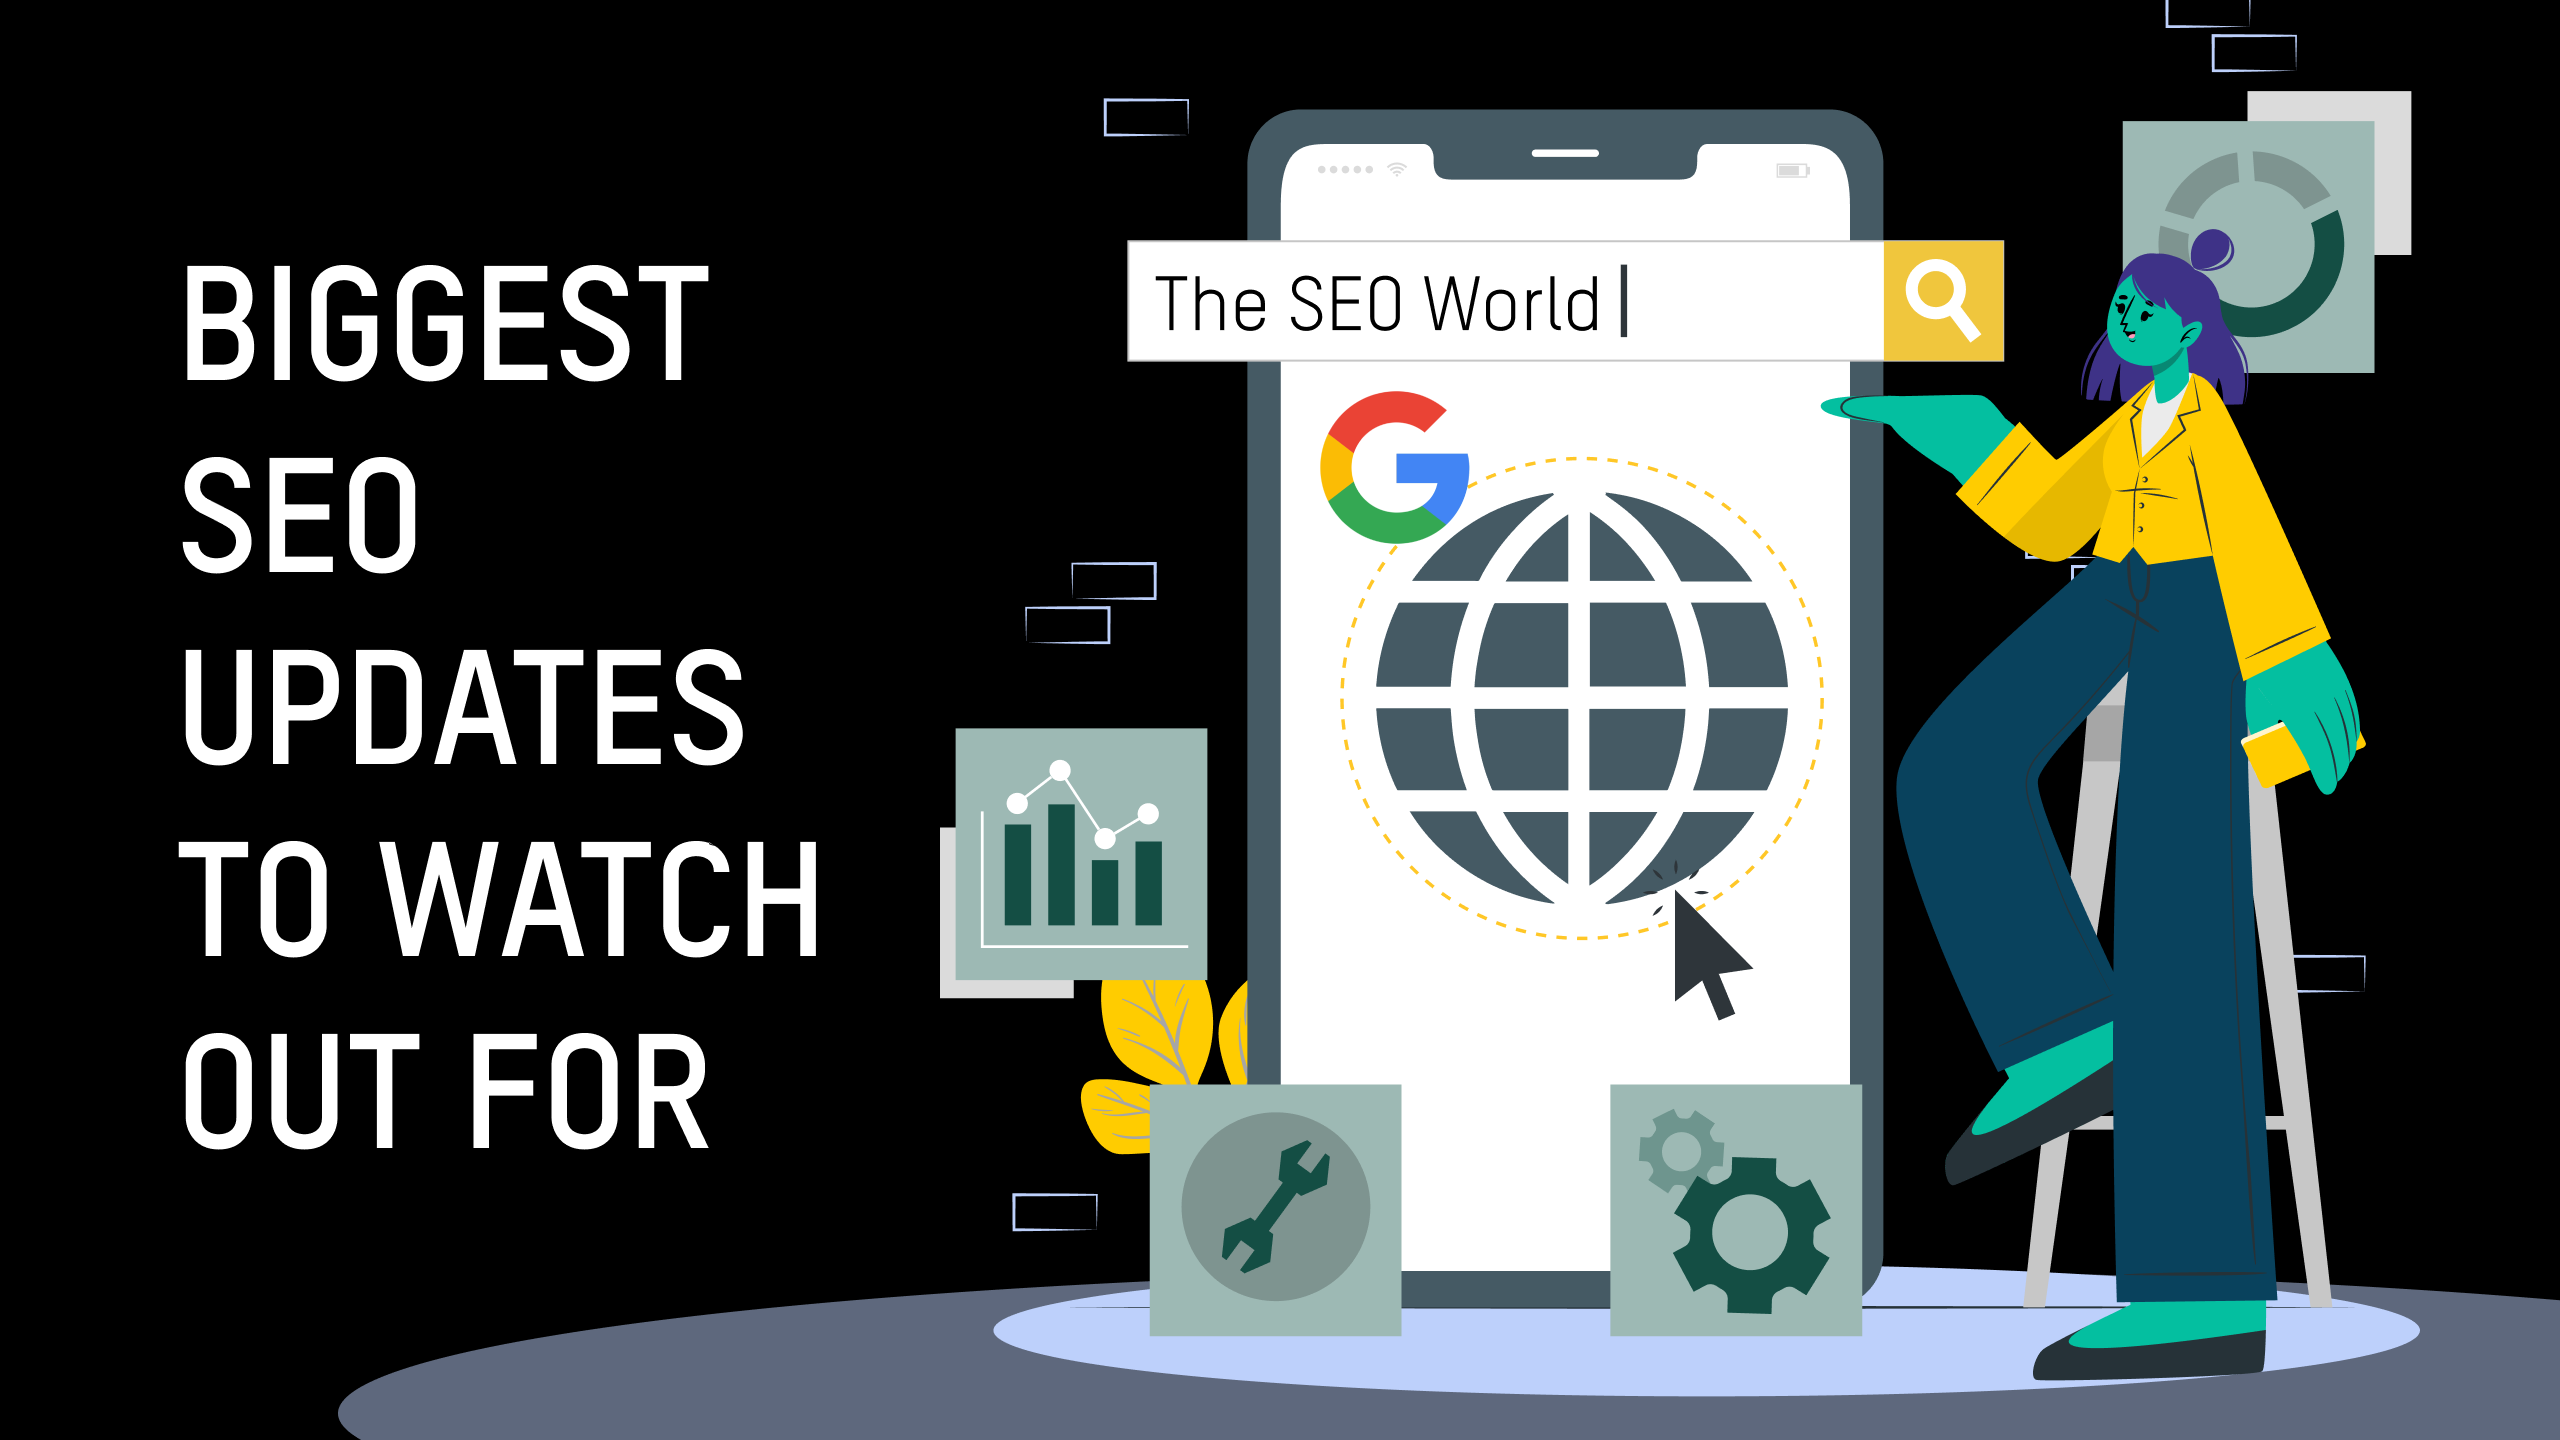 7 Google Updates Expected To Reshape The SEO World